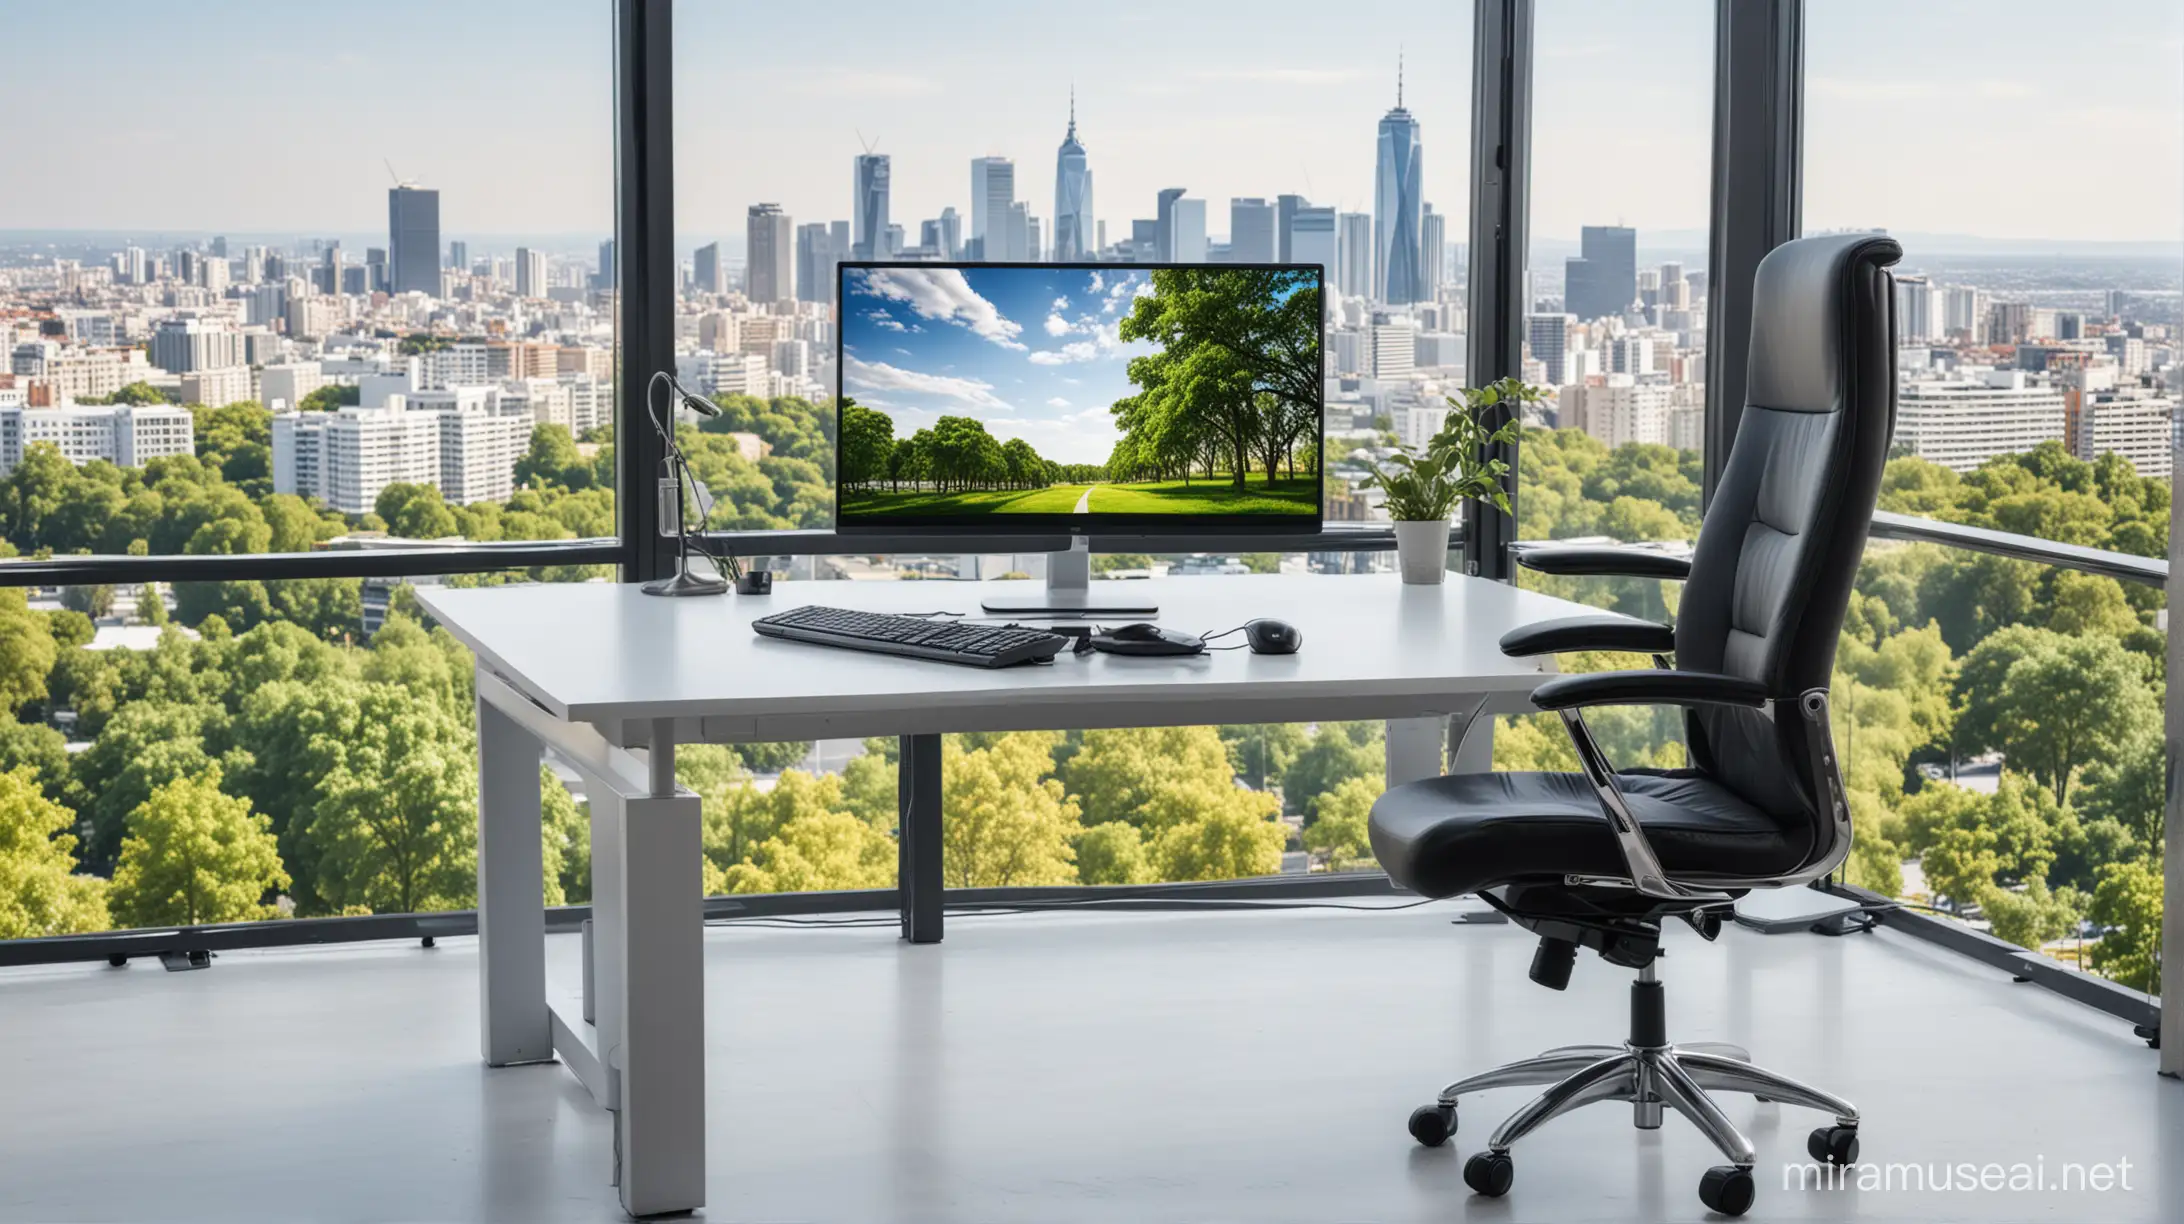 Modern Office Desk with Black Chair and Computer Monitor in Urban Setting